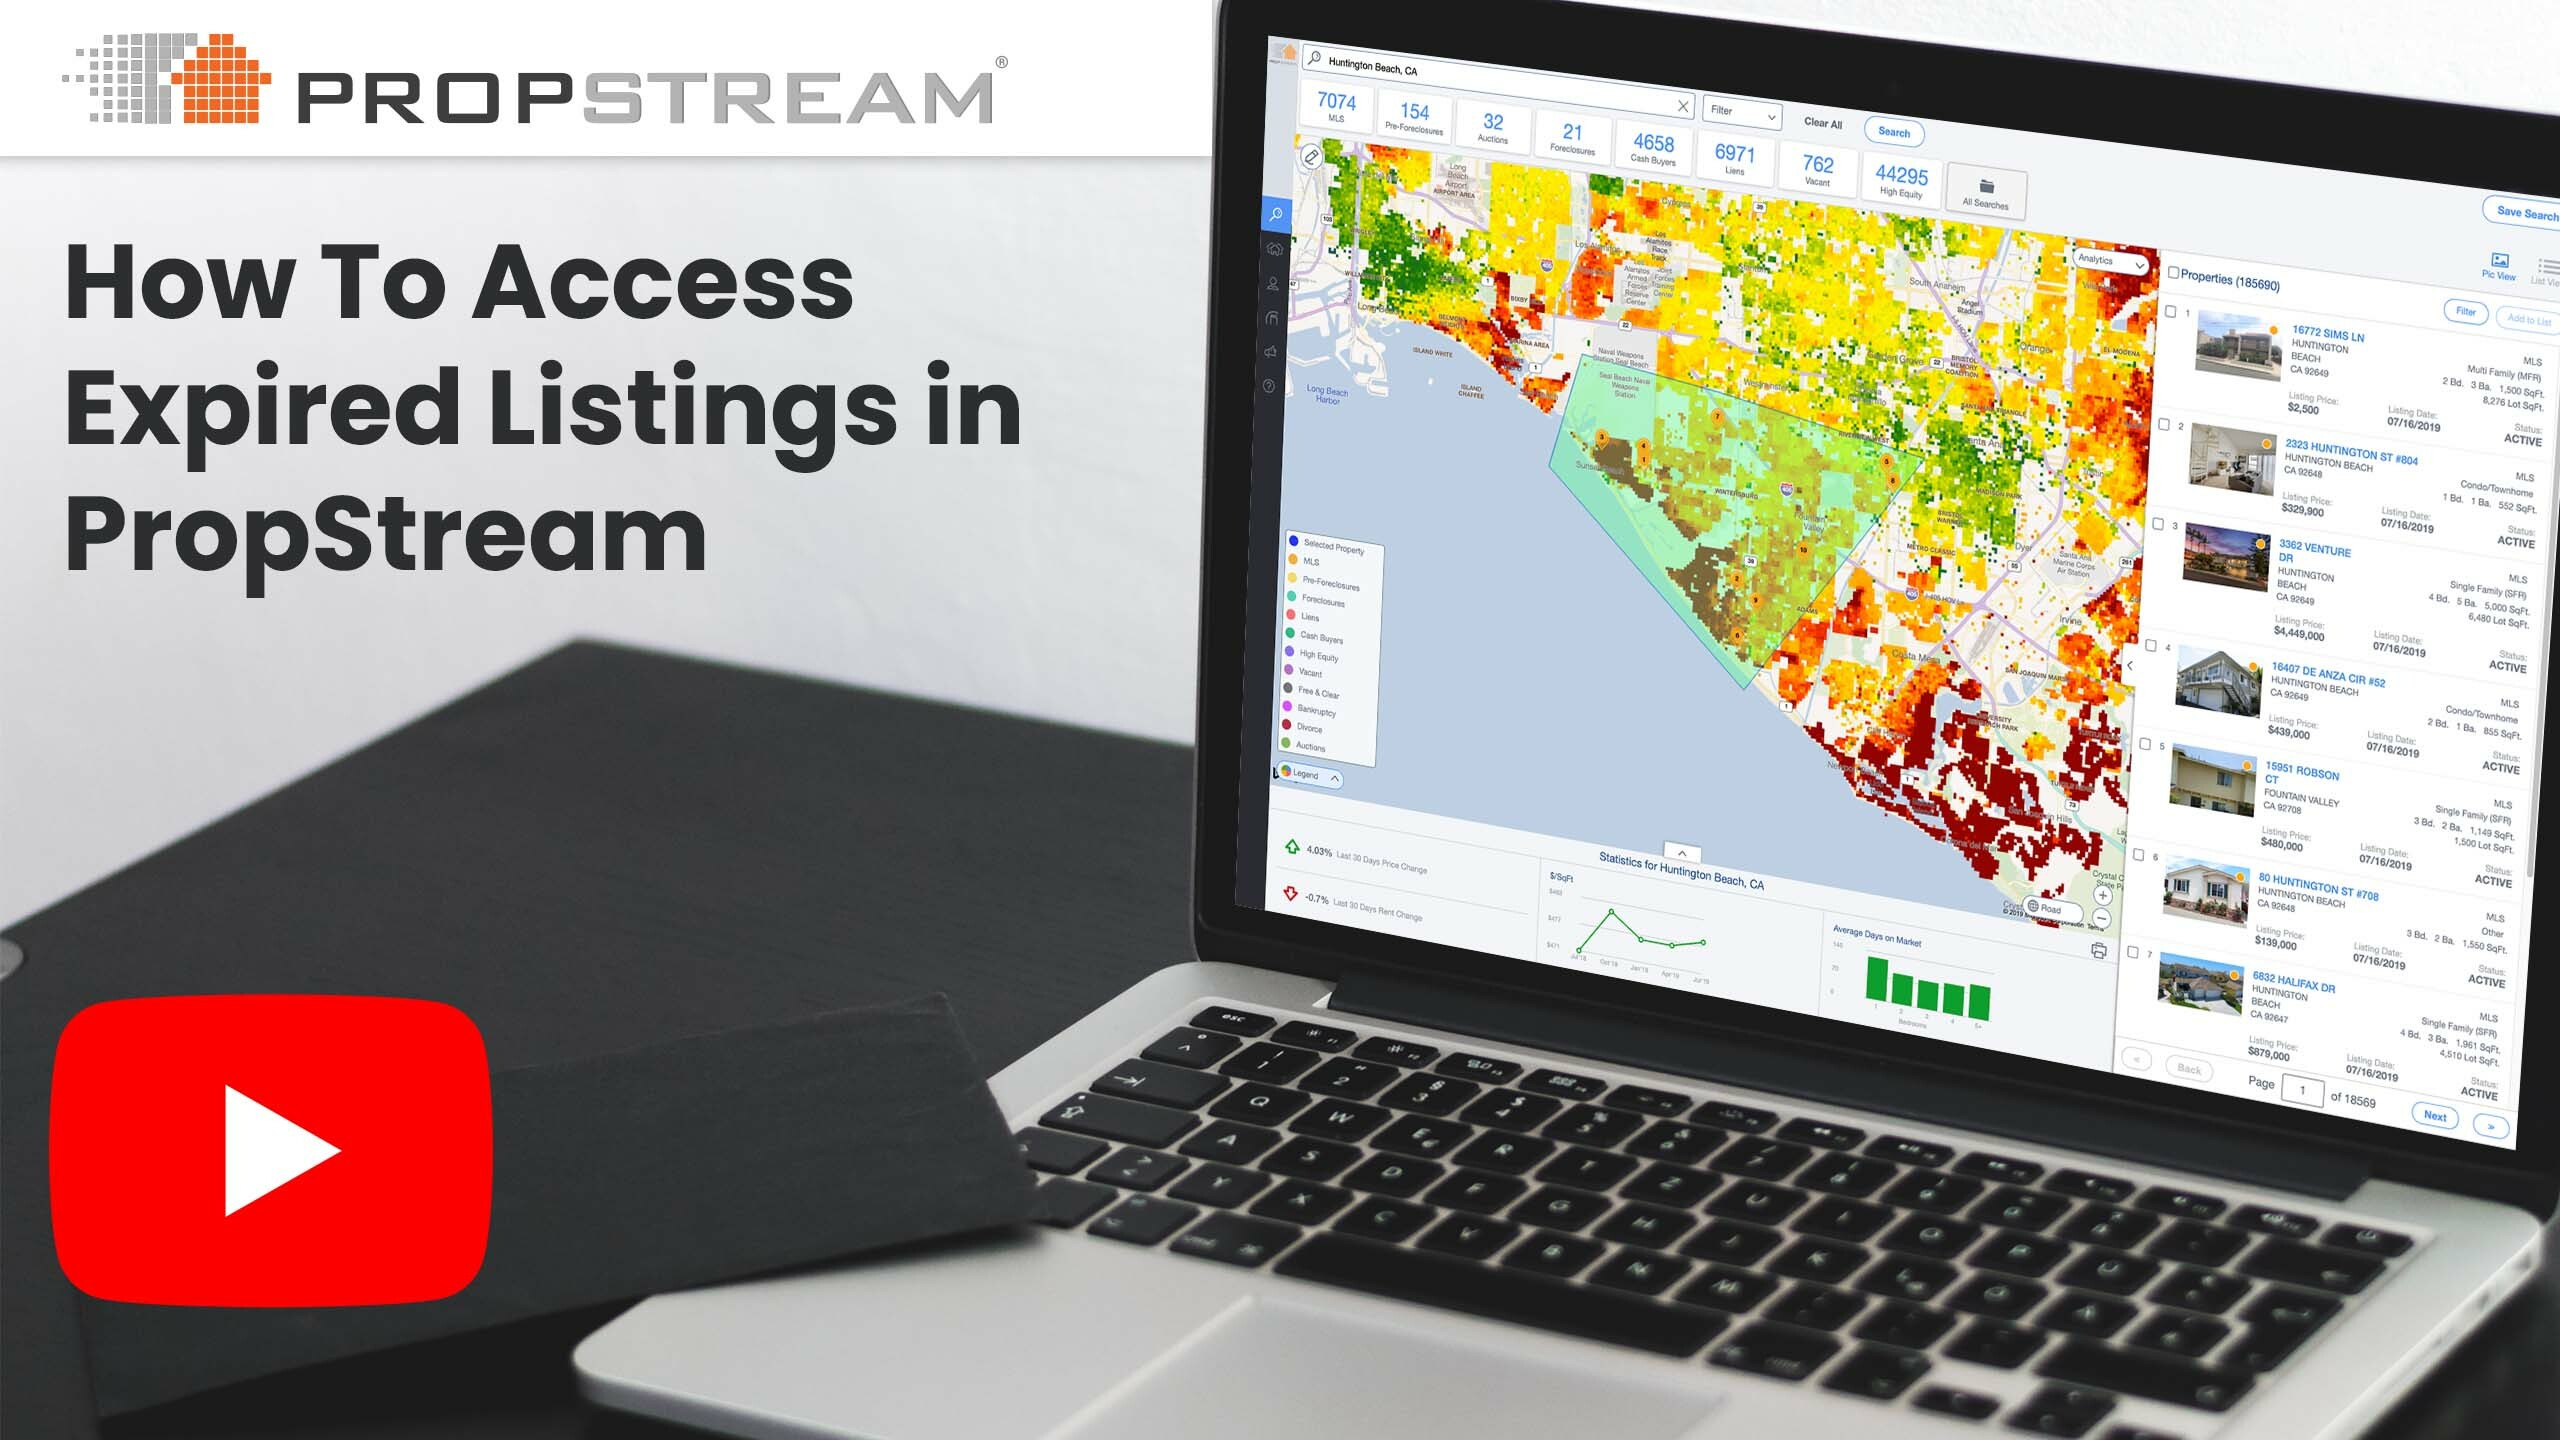 How To Access Expired Listings in PropStream